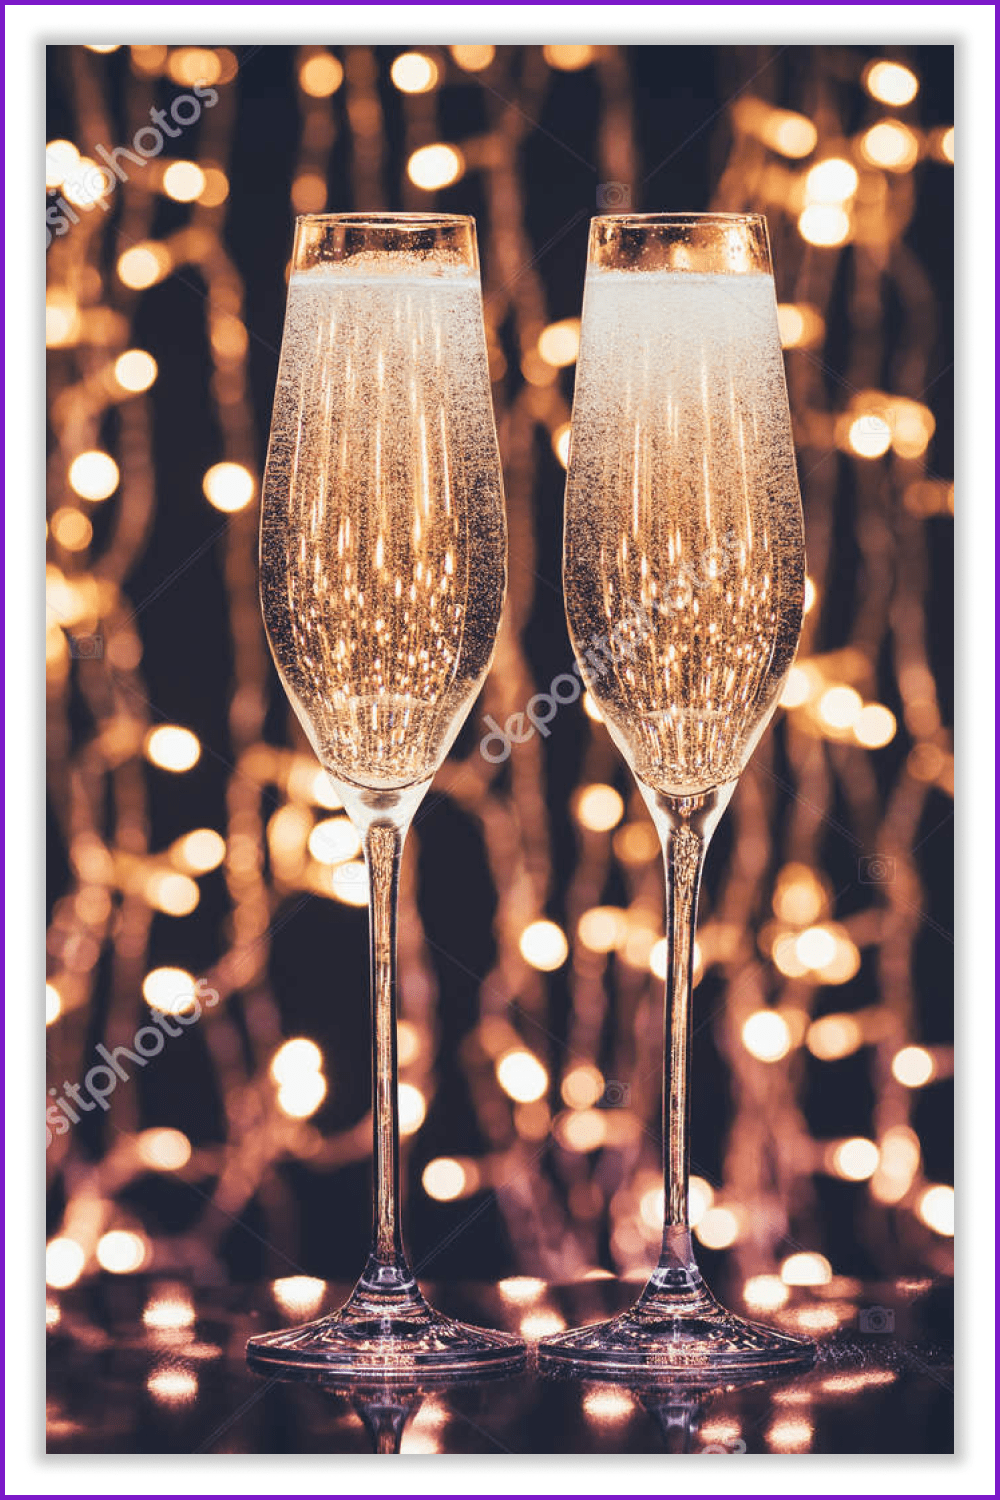 Two glasses of champagne against the background of glowing garlands.